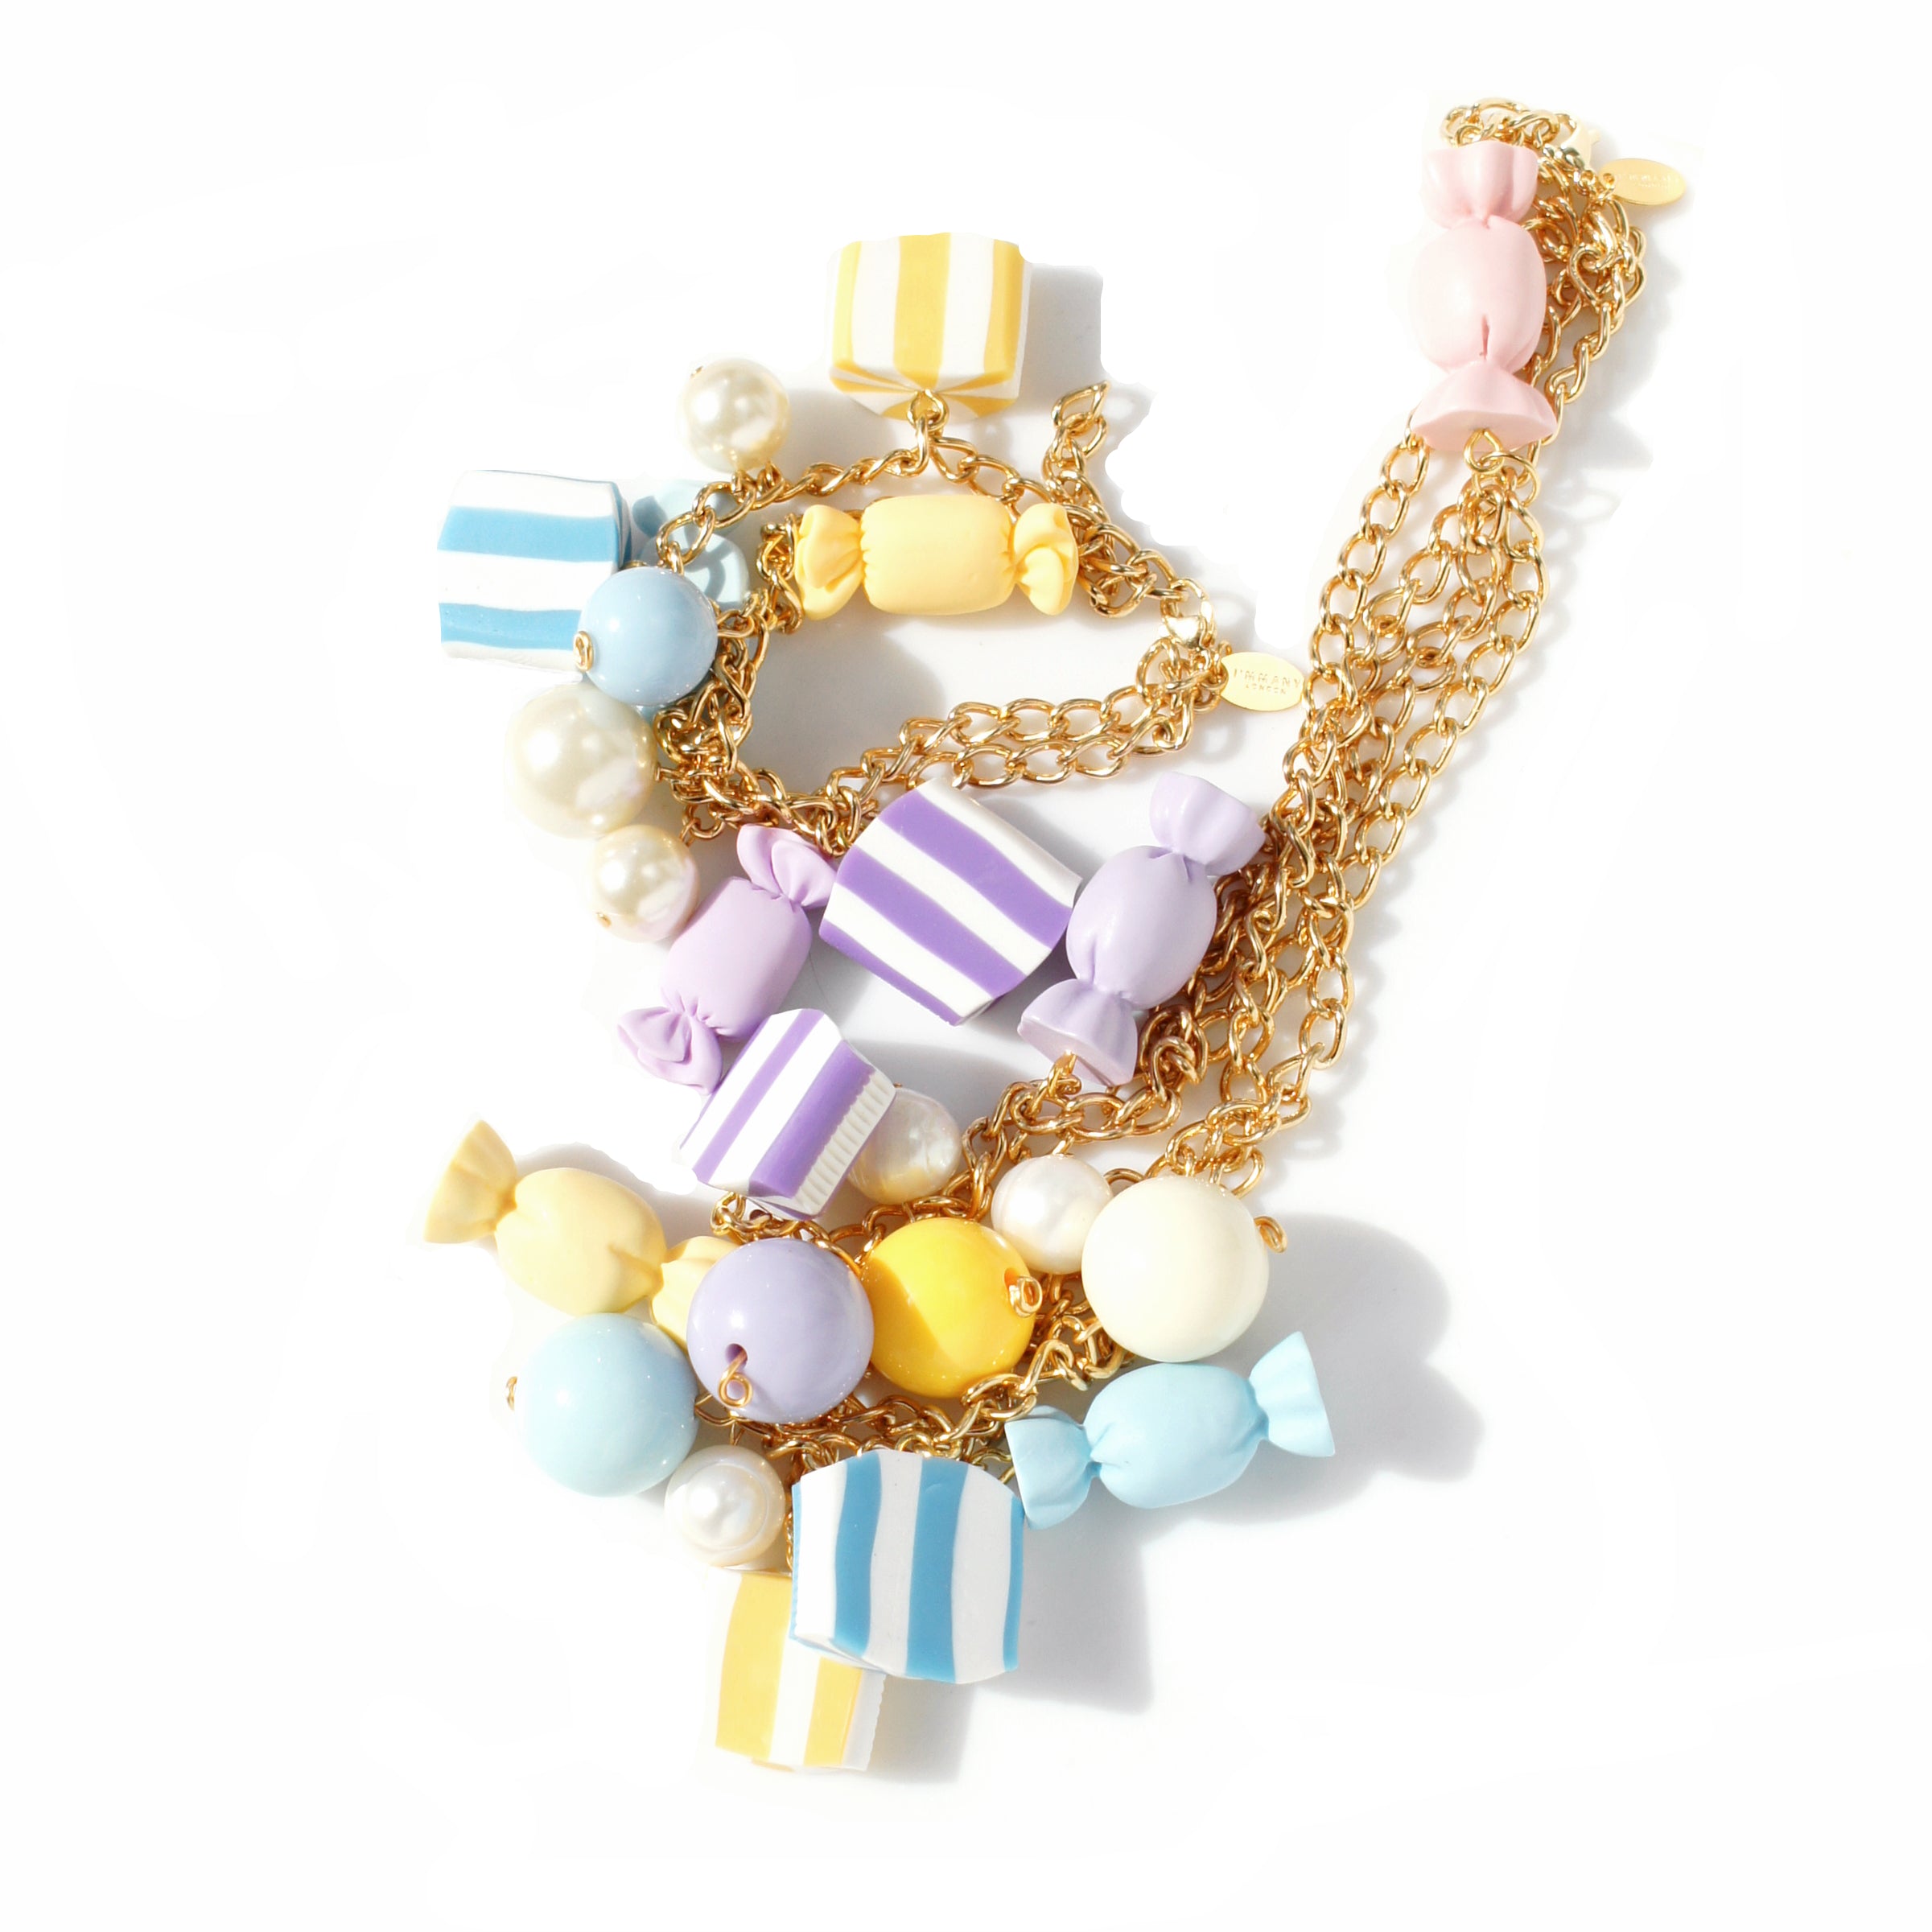 Milk Chews and Pearl Charm Necklace